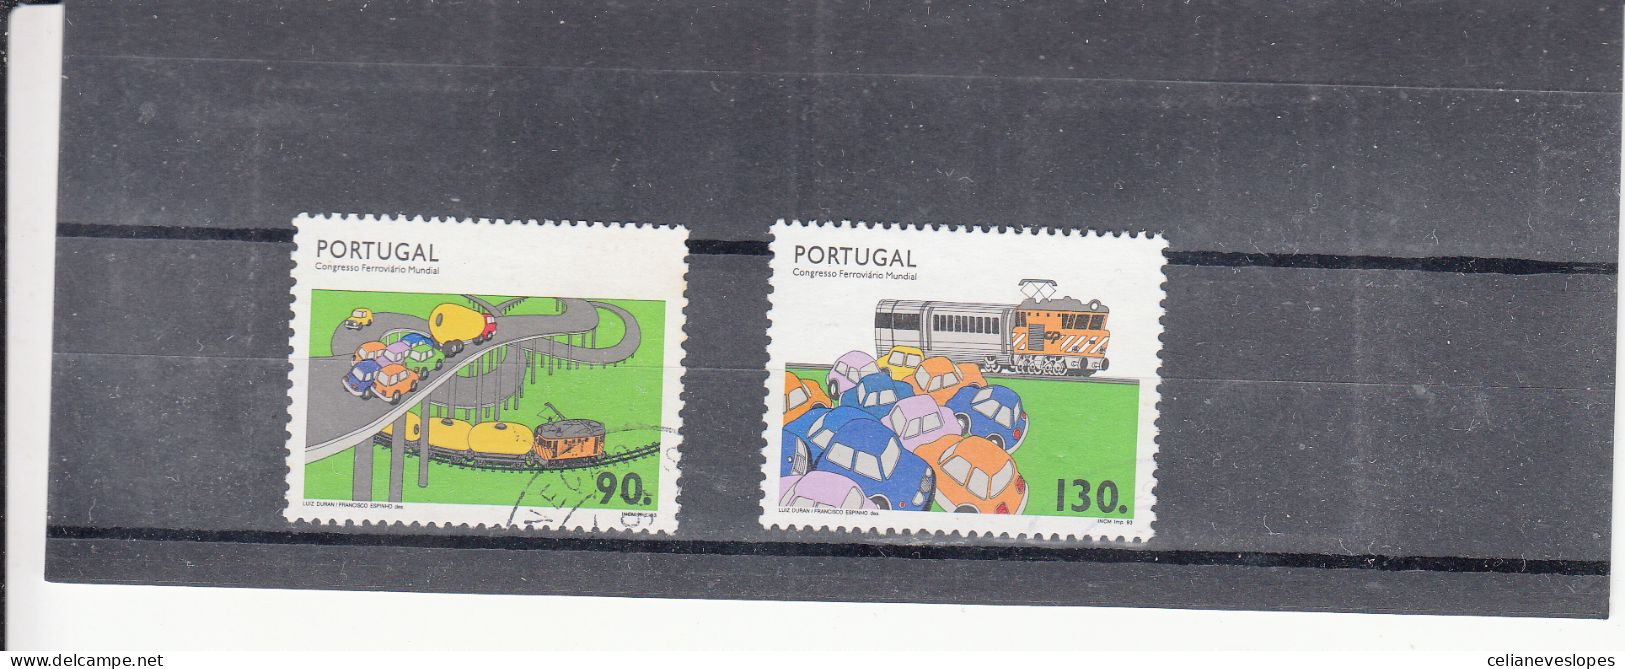 Portugal, Congresso Ferroviário Mundial, 1993, Mundifil Nº 2158 A 2159 Used - Used Stamps